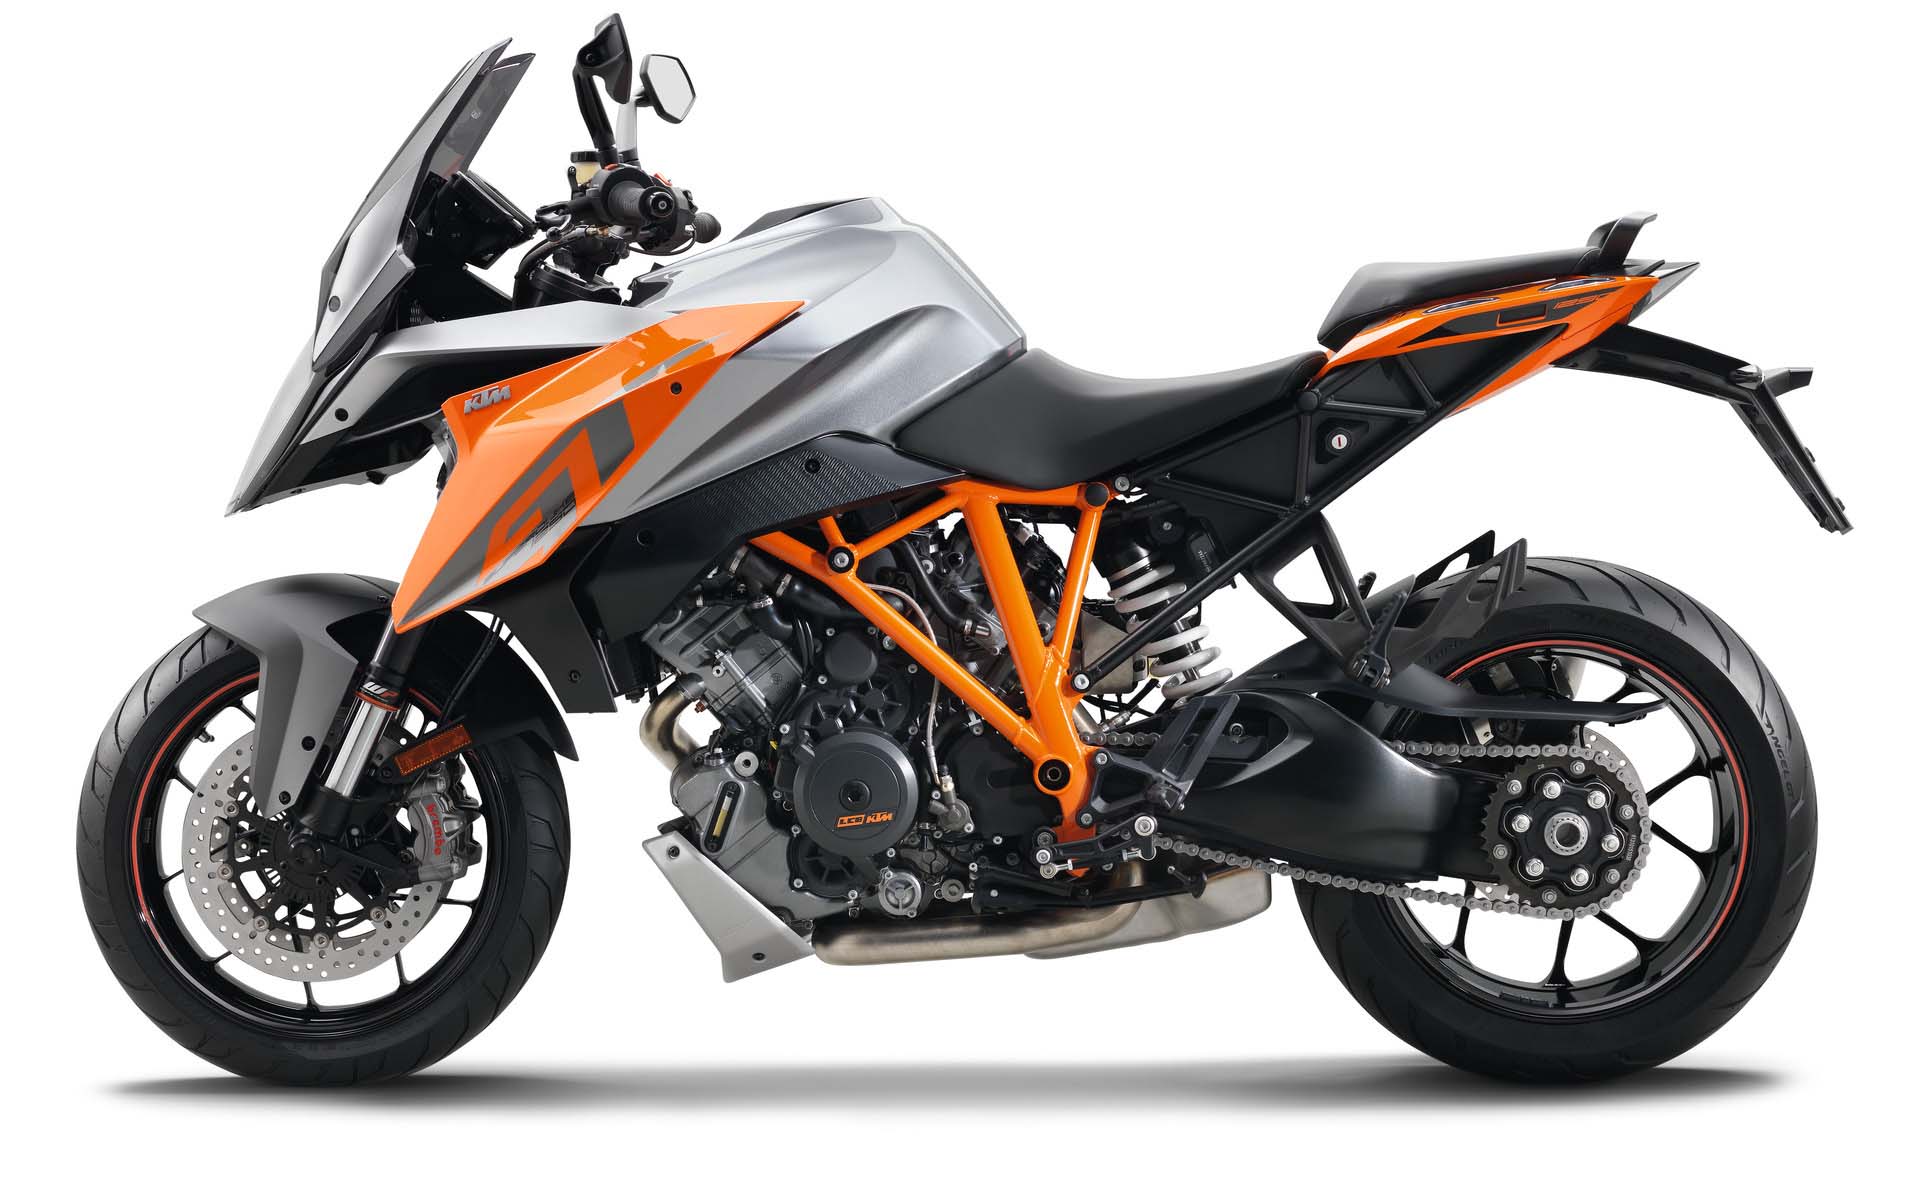 The KTM 1290 Super Duke GT Just Got More Awesome for 2019 